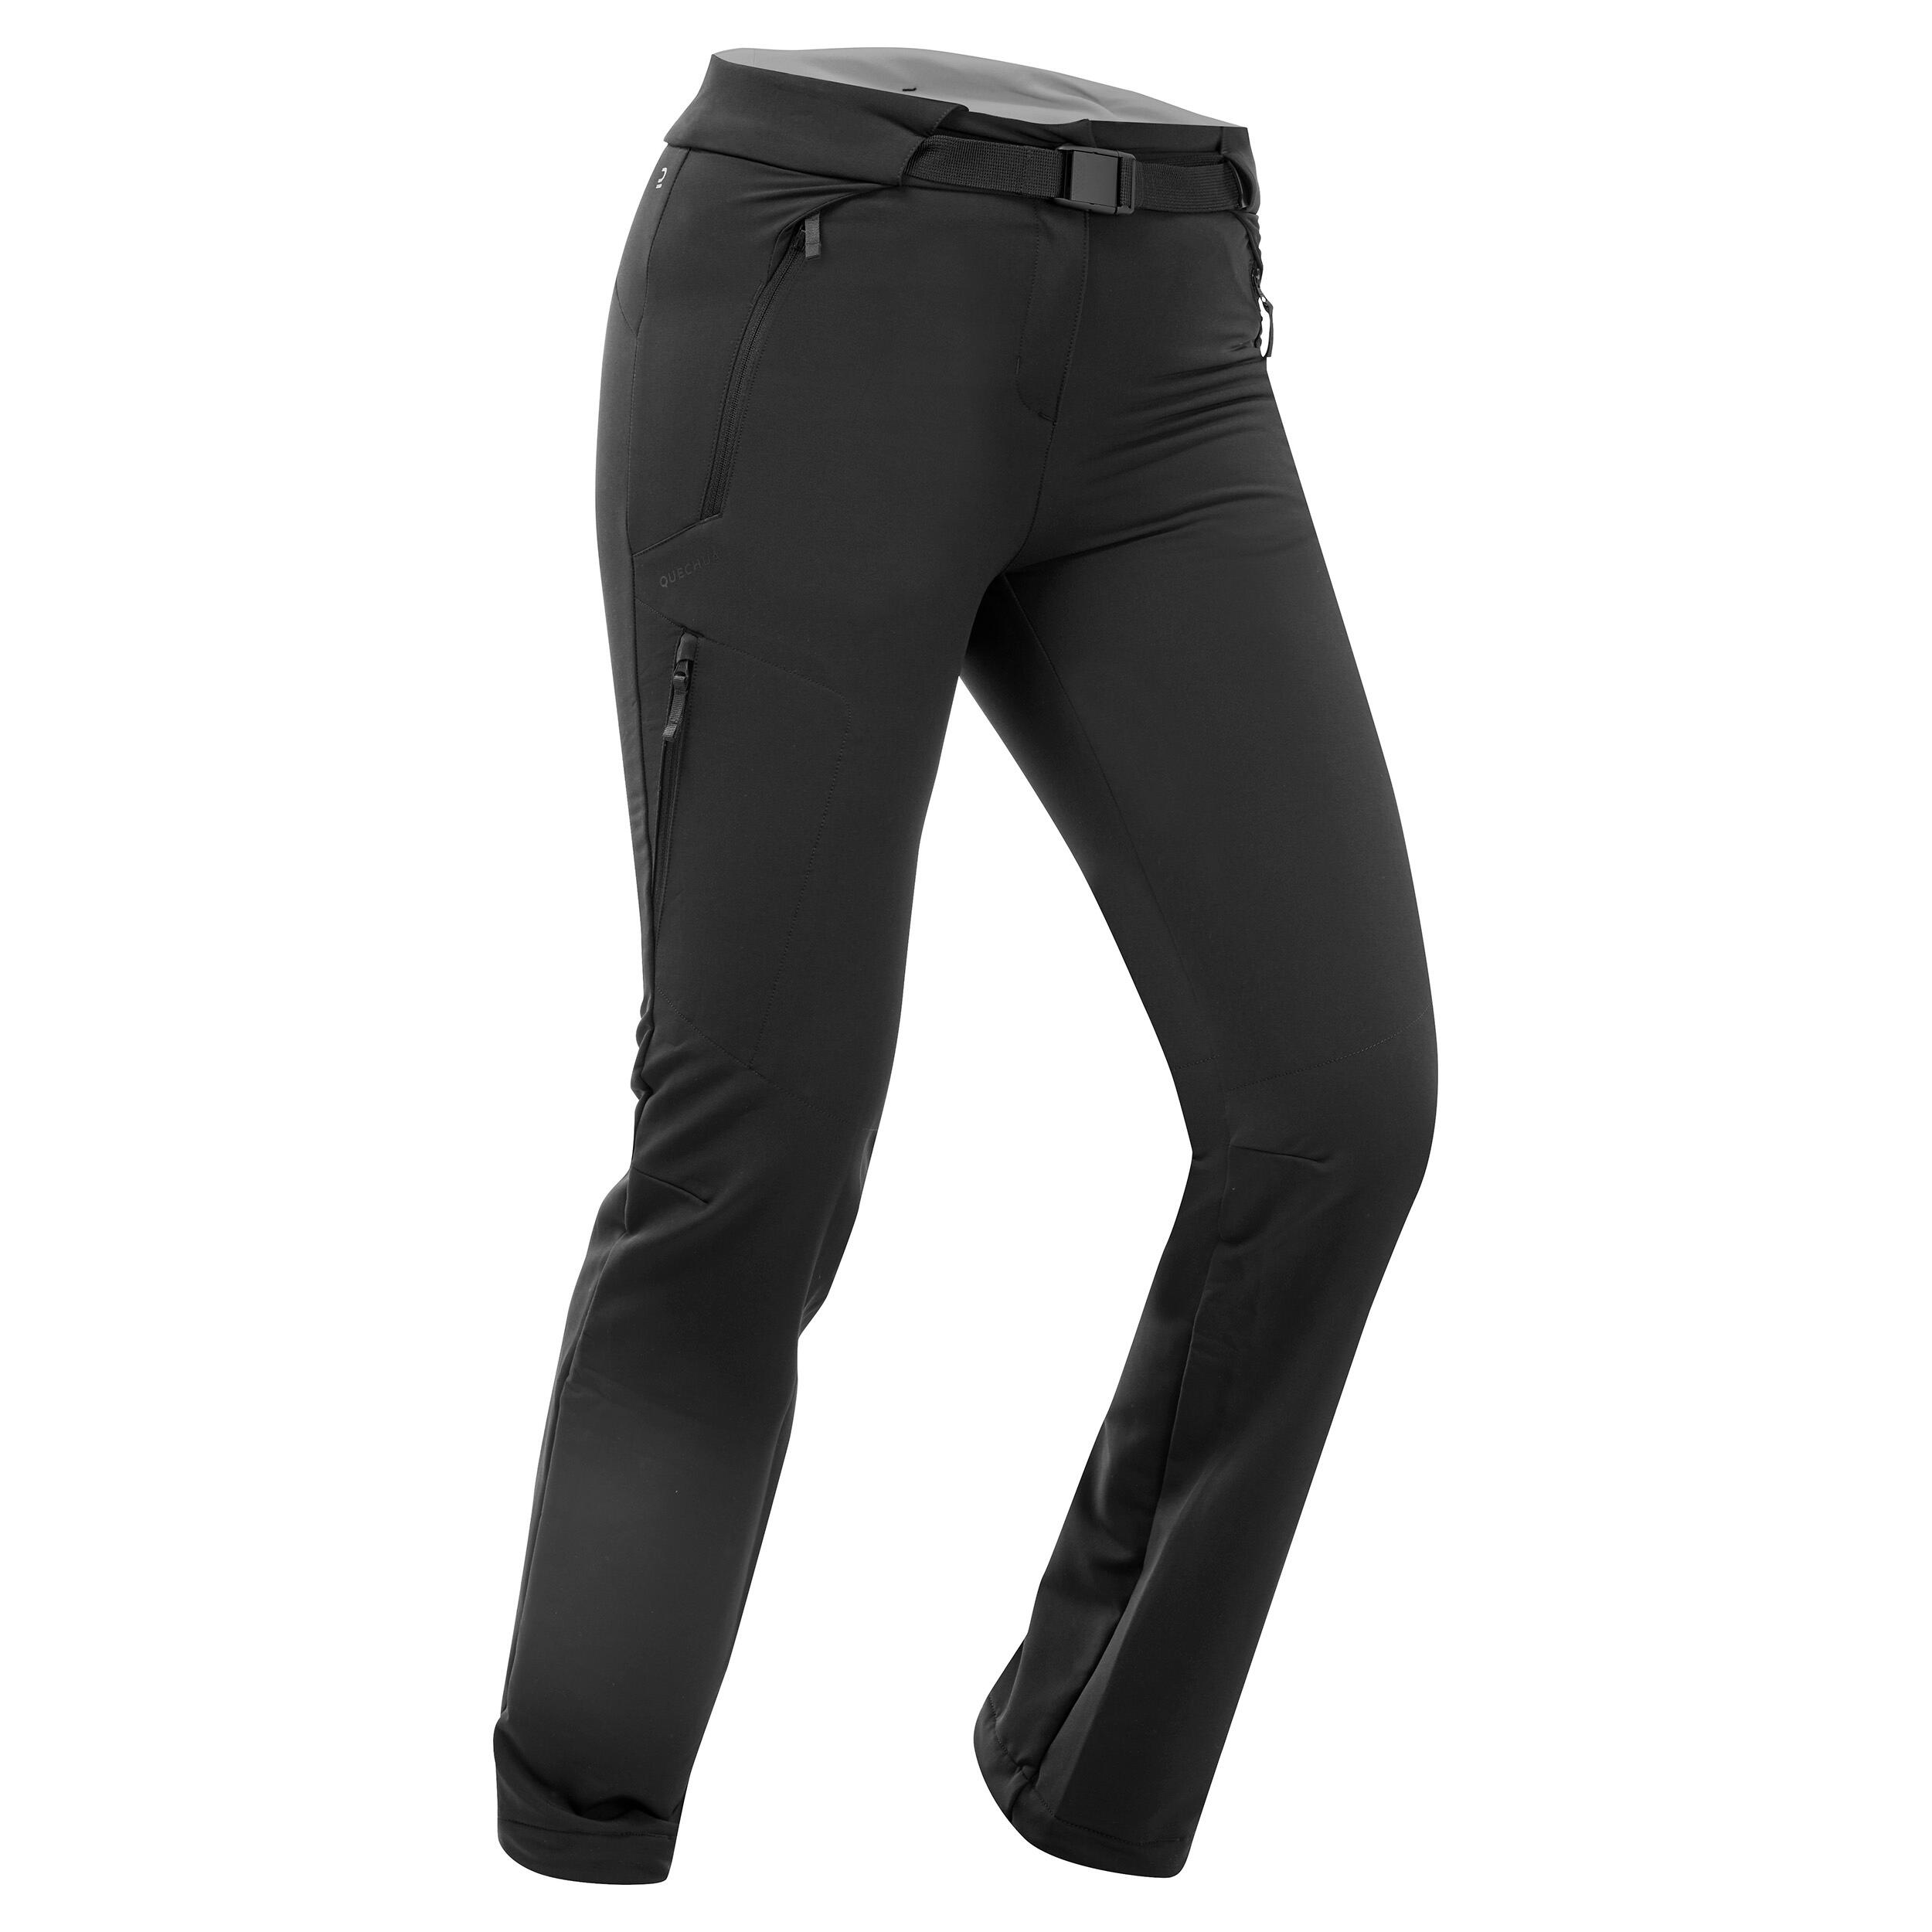 Peter Storm Walking Trousers  WomenS Ramble Lined Trousers Black  Womens   Miomana